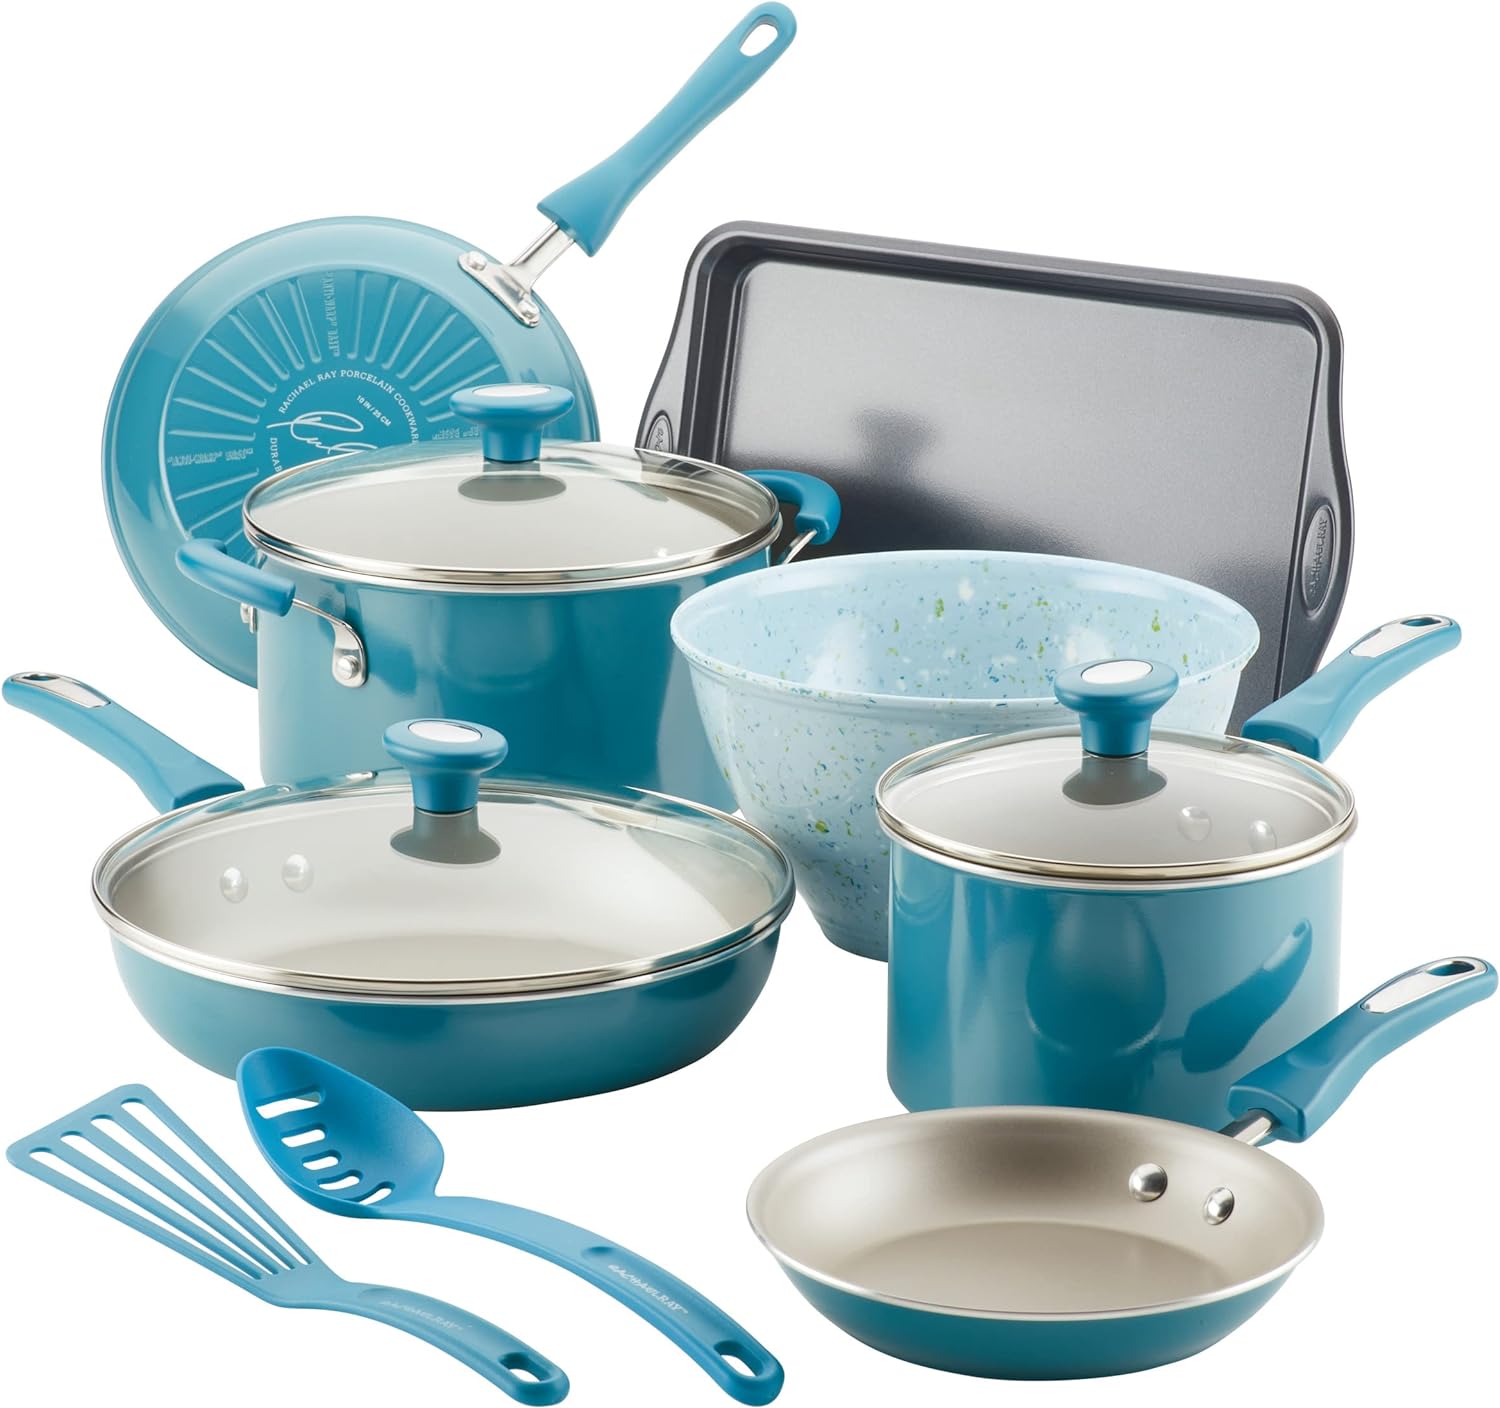 Rachael Ray Get Cooking! Nonstick Cookware Pots and Pans Set, Includes Baking Pan and Cooking Tools, 12 Piece - Turquoise